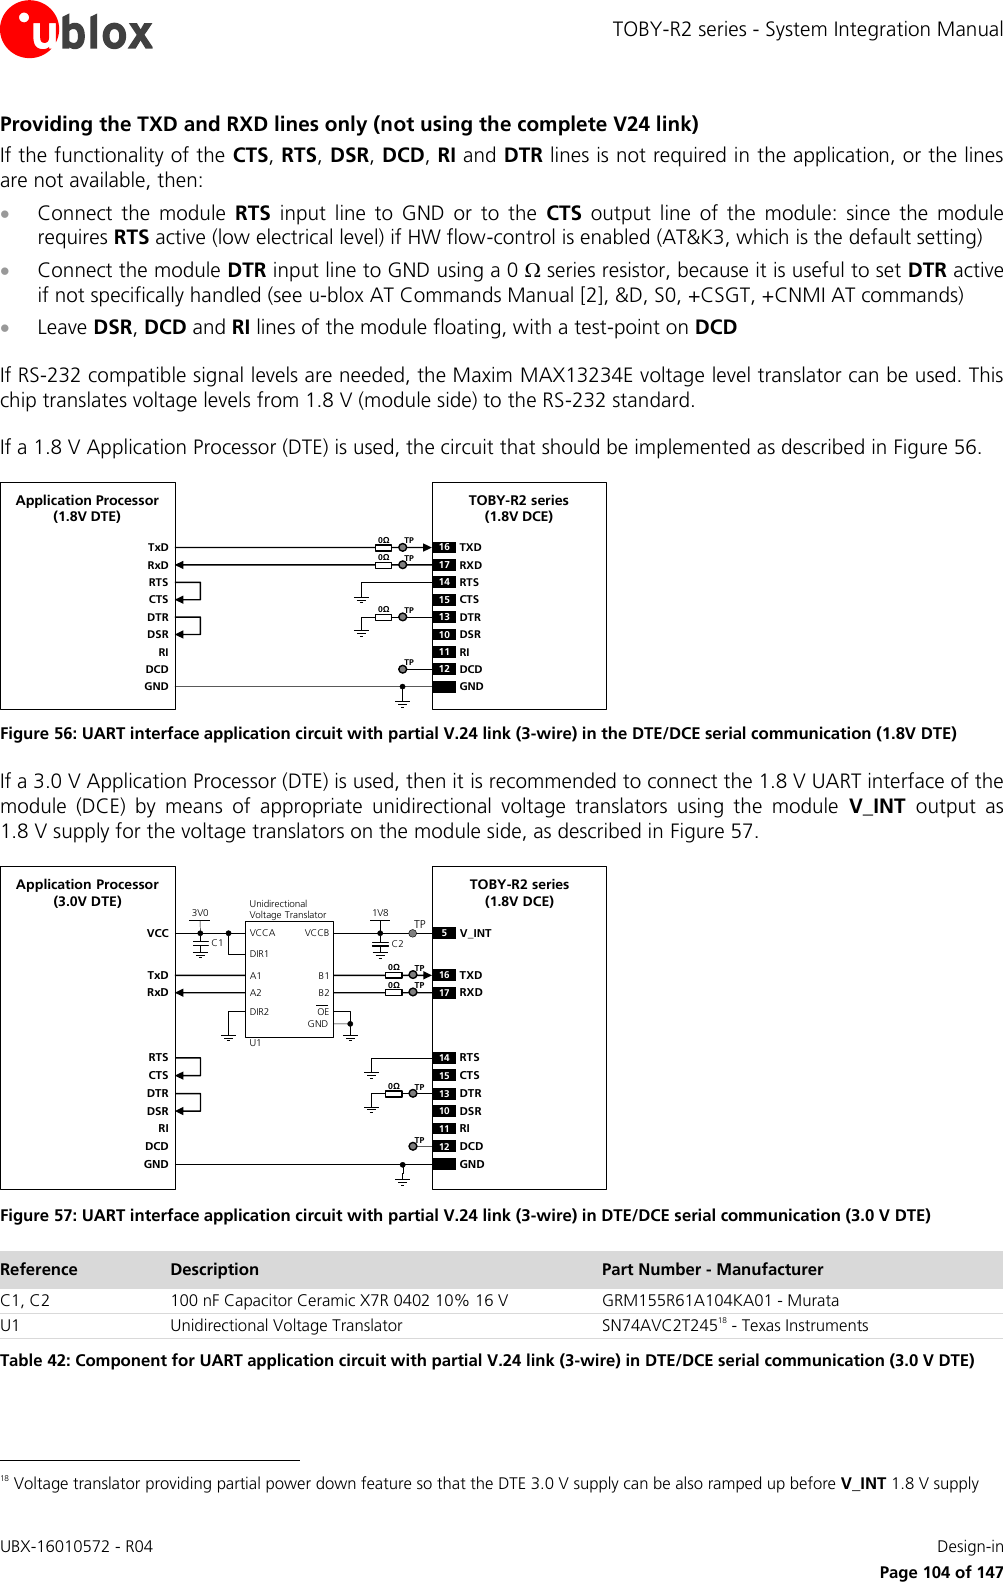 TOBY-R2 series - System Integration Manual UBX-16010572 - R04    Design-in     Page 104 of 147 Providing the TXD and RXD lines only (not using the complete V24 link) If the functionality of the CTS, RTS, DSR, DCD, RI and DTR lines is not required in the application, or the lines are not available, then:  Connect  the  module  RTS  input  line  to  GND  or  to  the  CTS  output  line  of  the  module:  since  the  module requires RTS active (low electrical level) if HW flow-control is enabled (AT&amp;K3, which is the default setting)  Connect the module DTR input line to GND using a 0  series resistor, because it is useful to set DTR active if not specifically handled (see u-blox AT Commands Manual [2], &amp;D, S0, +CSGT, +CNMI AT commands)  Leave DSR, DCD and RI lines of the module floating, with a test-point on DCD  If RS-232 compatible signal levels are needed, the Maxim MAX13234E voltage level translator can be used. This chip translates voltage levels from 1.8 V (module side) to the RS-232 standard.   If a 1.8 V Application Processor (DTE) is used, the circuit that should be implemented as described in Figure 56. TxDApplication Processor(1.8V DTE)RxDRTSCTSDTRDSRRIDCDGNDTOBY-R2 series (1.8V DCE)16 TXD13 DTR17 RXD14 RTS15 CTS10 DSR11 RI12 DCDGND0ΩTP0ΩTP0ΩTPTP Figure 56: UART interface application circuit with partial V.24 link (3-wire) in the DTE/DCE serial communication (1.8V DTE) If a 3.0 V Application Processor (DTE) is used, then it is recommended to connect the 1.8 V UART interface of the module  (DCE)  by  means  of  appropriate  unidirectional  voltage  translators  using  the  module  V_INT  output  as 1.8 V supply for the voltage translators on the module side, as described in Figure 57. 5V_INTTxDApplication Processor(3.0V DTE)RxDDTRDSRRIDCDGNDTOBY-R2 series (1.8V DCE)16 TXD13 DTR17 RXD10 DSR11 RI12 DCDGND1V8B1 A1GNDU1VCCBVCCAUnidirectionalVoltage TranslatorC1 C23V0DIR1DIR2 OEVCCB2 A2RTSCTS14 RTS15 CTSTP0ΩTP0ΩTP0ΩTPTP Figure 57: UART interface application circuit with partial V.24 link (3-wire) in DTE/DCE serial communication (3.0 V DTE) Reference Description Part Number - Manufacturer C1, C2 100 nF Capacitor Ceramic X7R 0402 10% 16 V GRM155R61A104KA01 - Murata U1 Unidirectional Voltage Translator SN74AVC2T24518 - Texas Instruments Table 42: Component for UART application circuit with partial V.24 link (3-wire) in DTE/DCE serial communication (3.0 V DTE)                                                       18 Voltage translator providing partial power down feature so that the DTE 3.0 V supply can be also ramped up before V_INT 1.8 V supply 